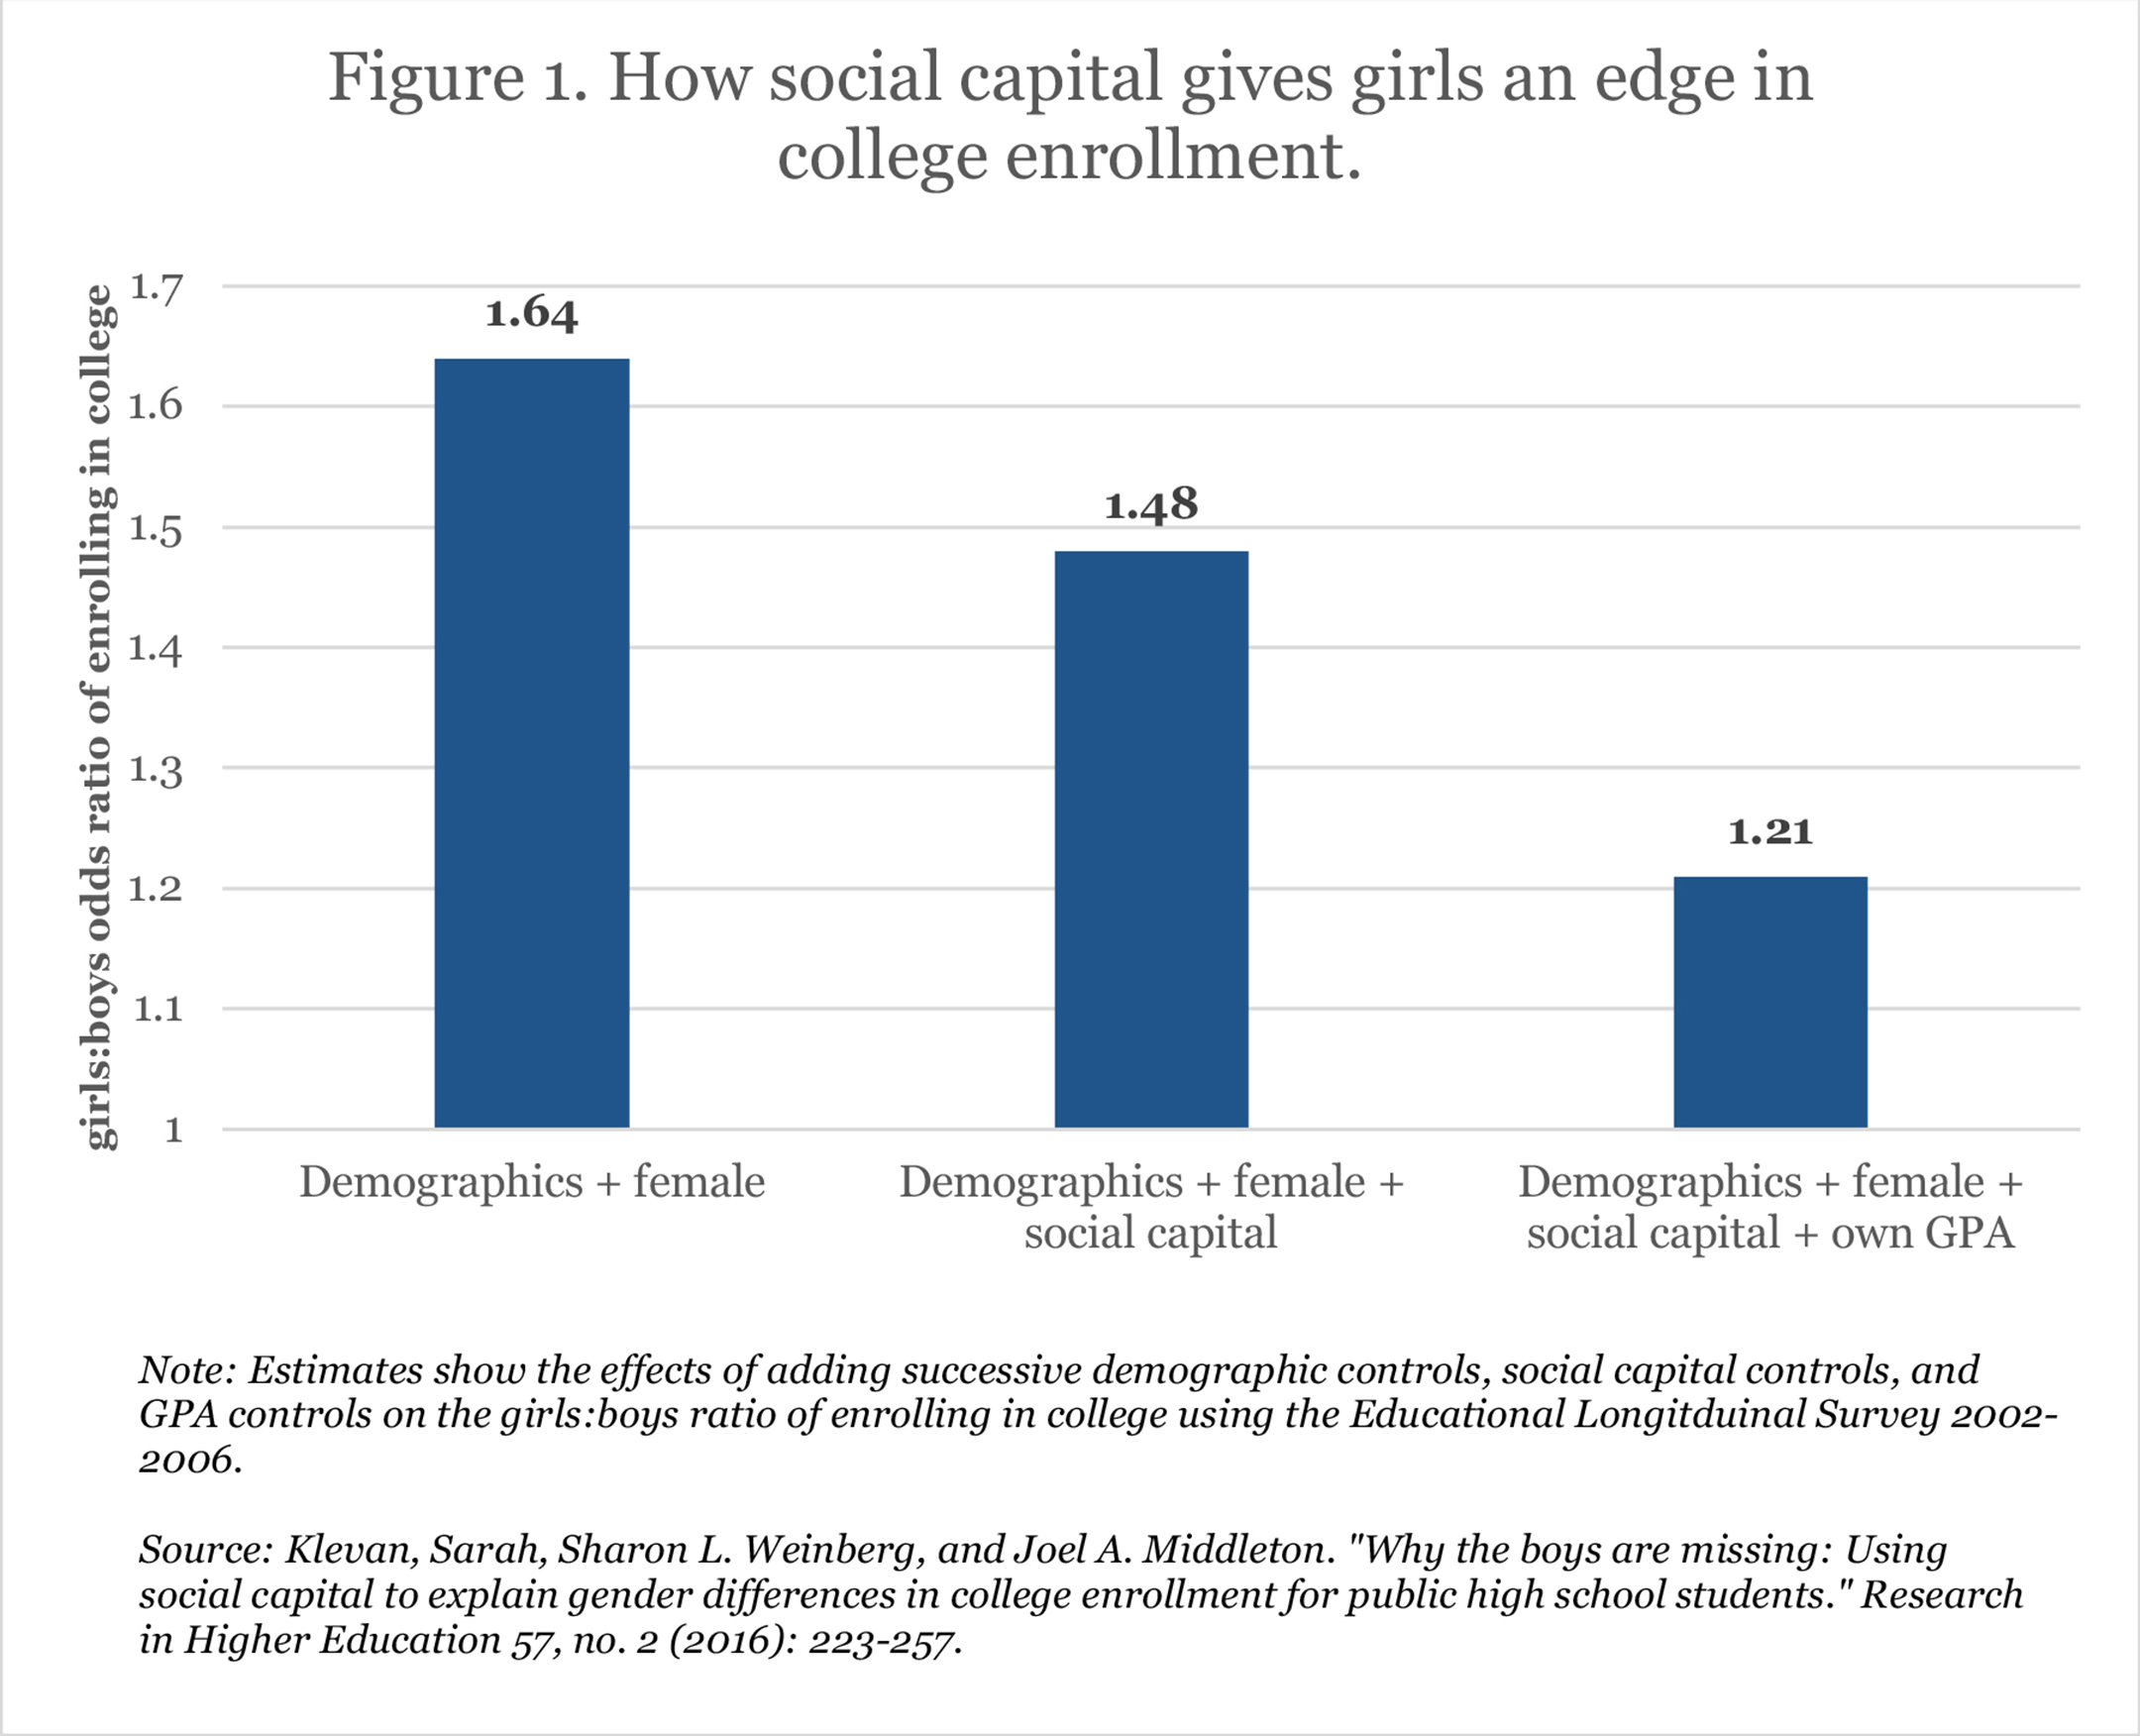 Bar chart titled "Figure 1. How social capital gives girls an edge in college enrollment" with three blue bars charting "Demographics + female," "Demographics + female + social capital," and "Demographics + female + social capital + own GPA"